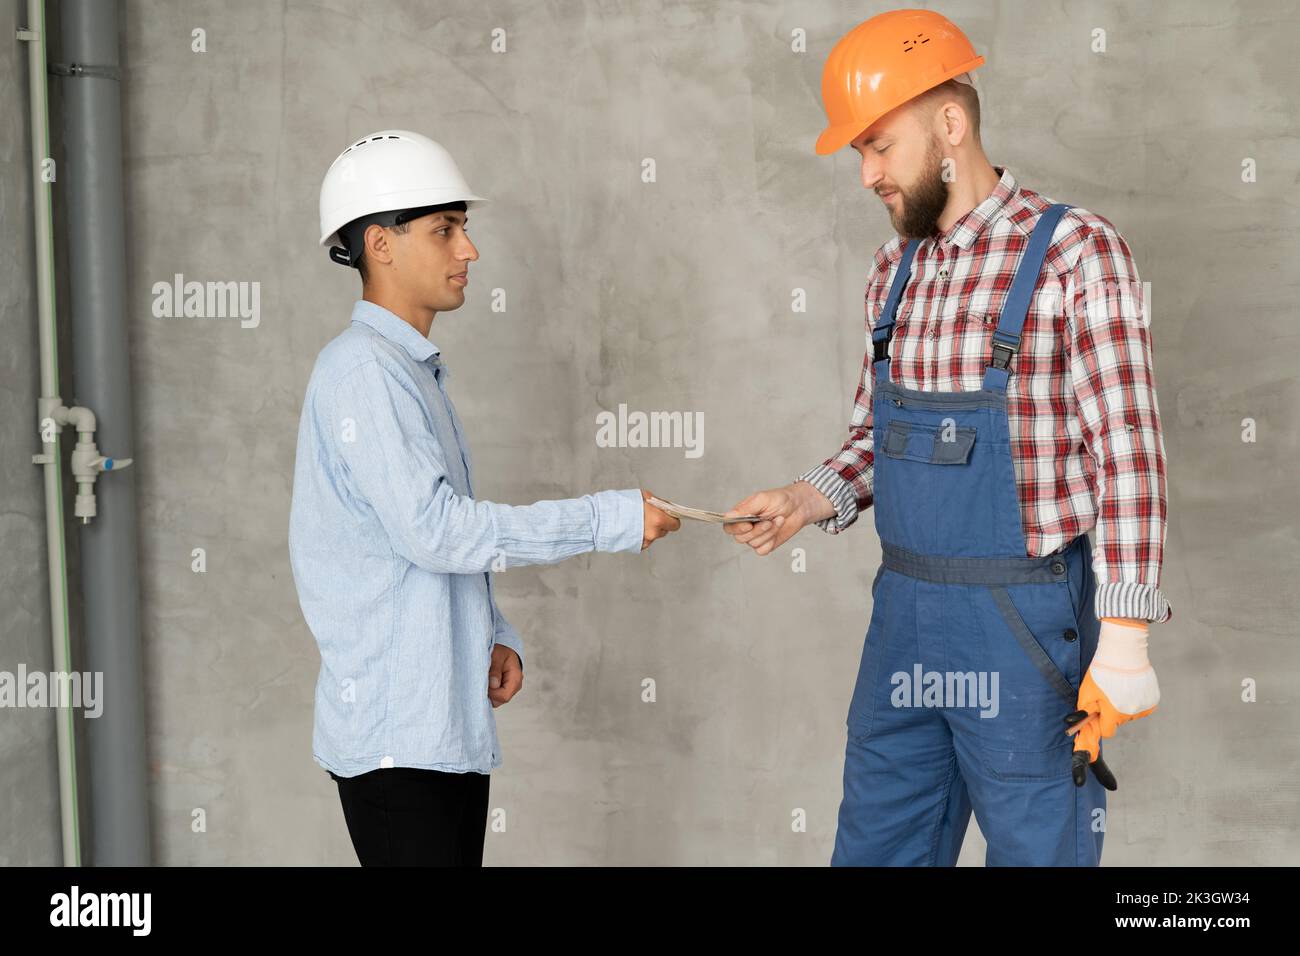 Man manager pays for the work of foreman builder repairman with dollar money. construction site concept. Focus on hands with money. business man maste Stock Photo